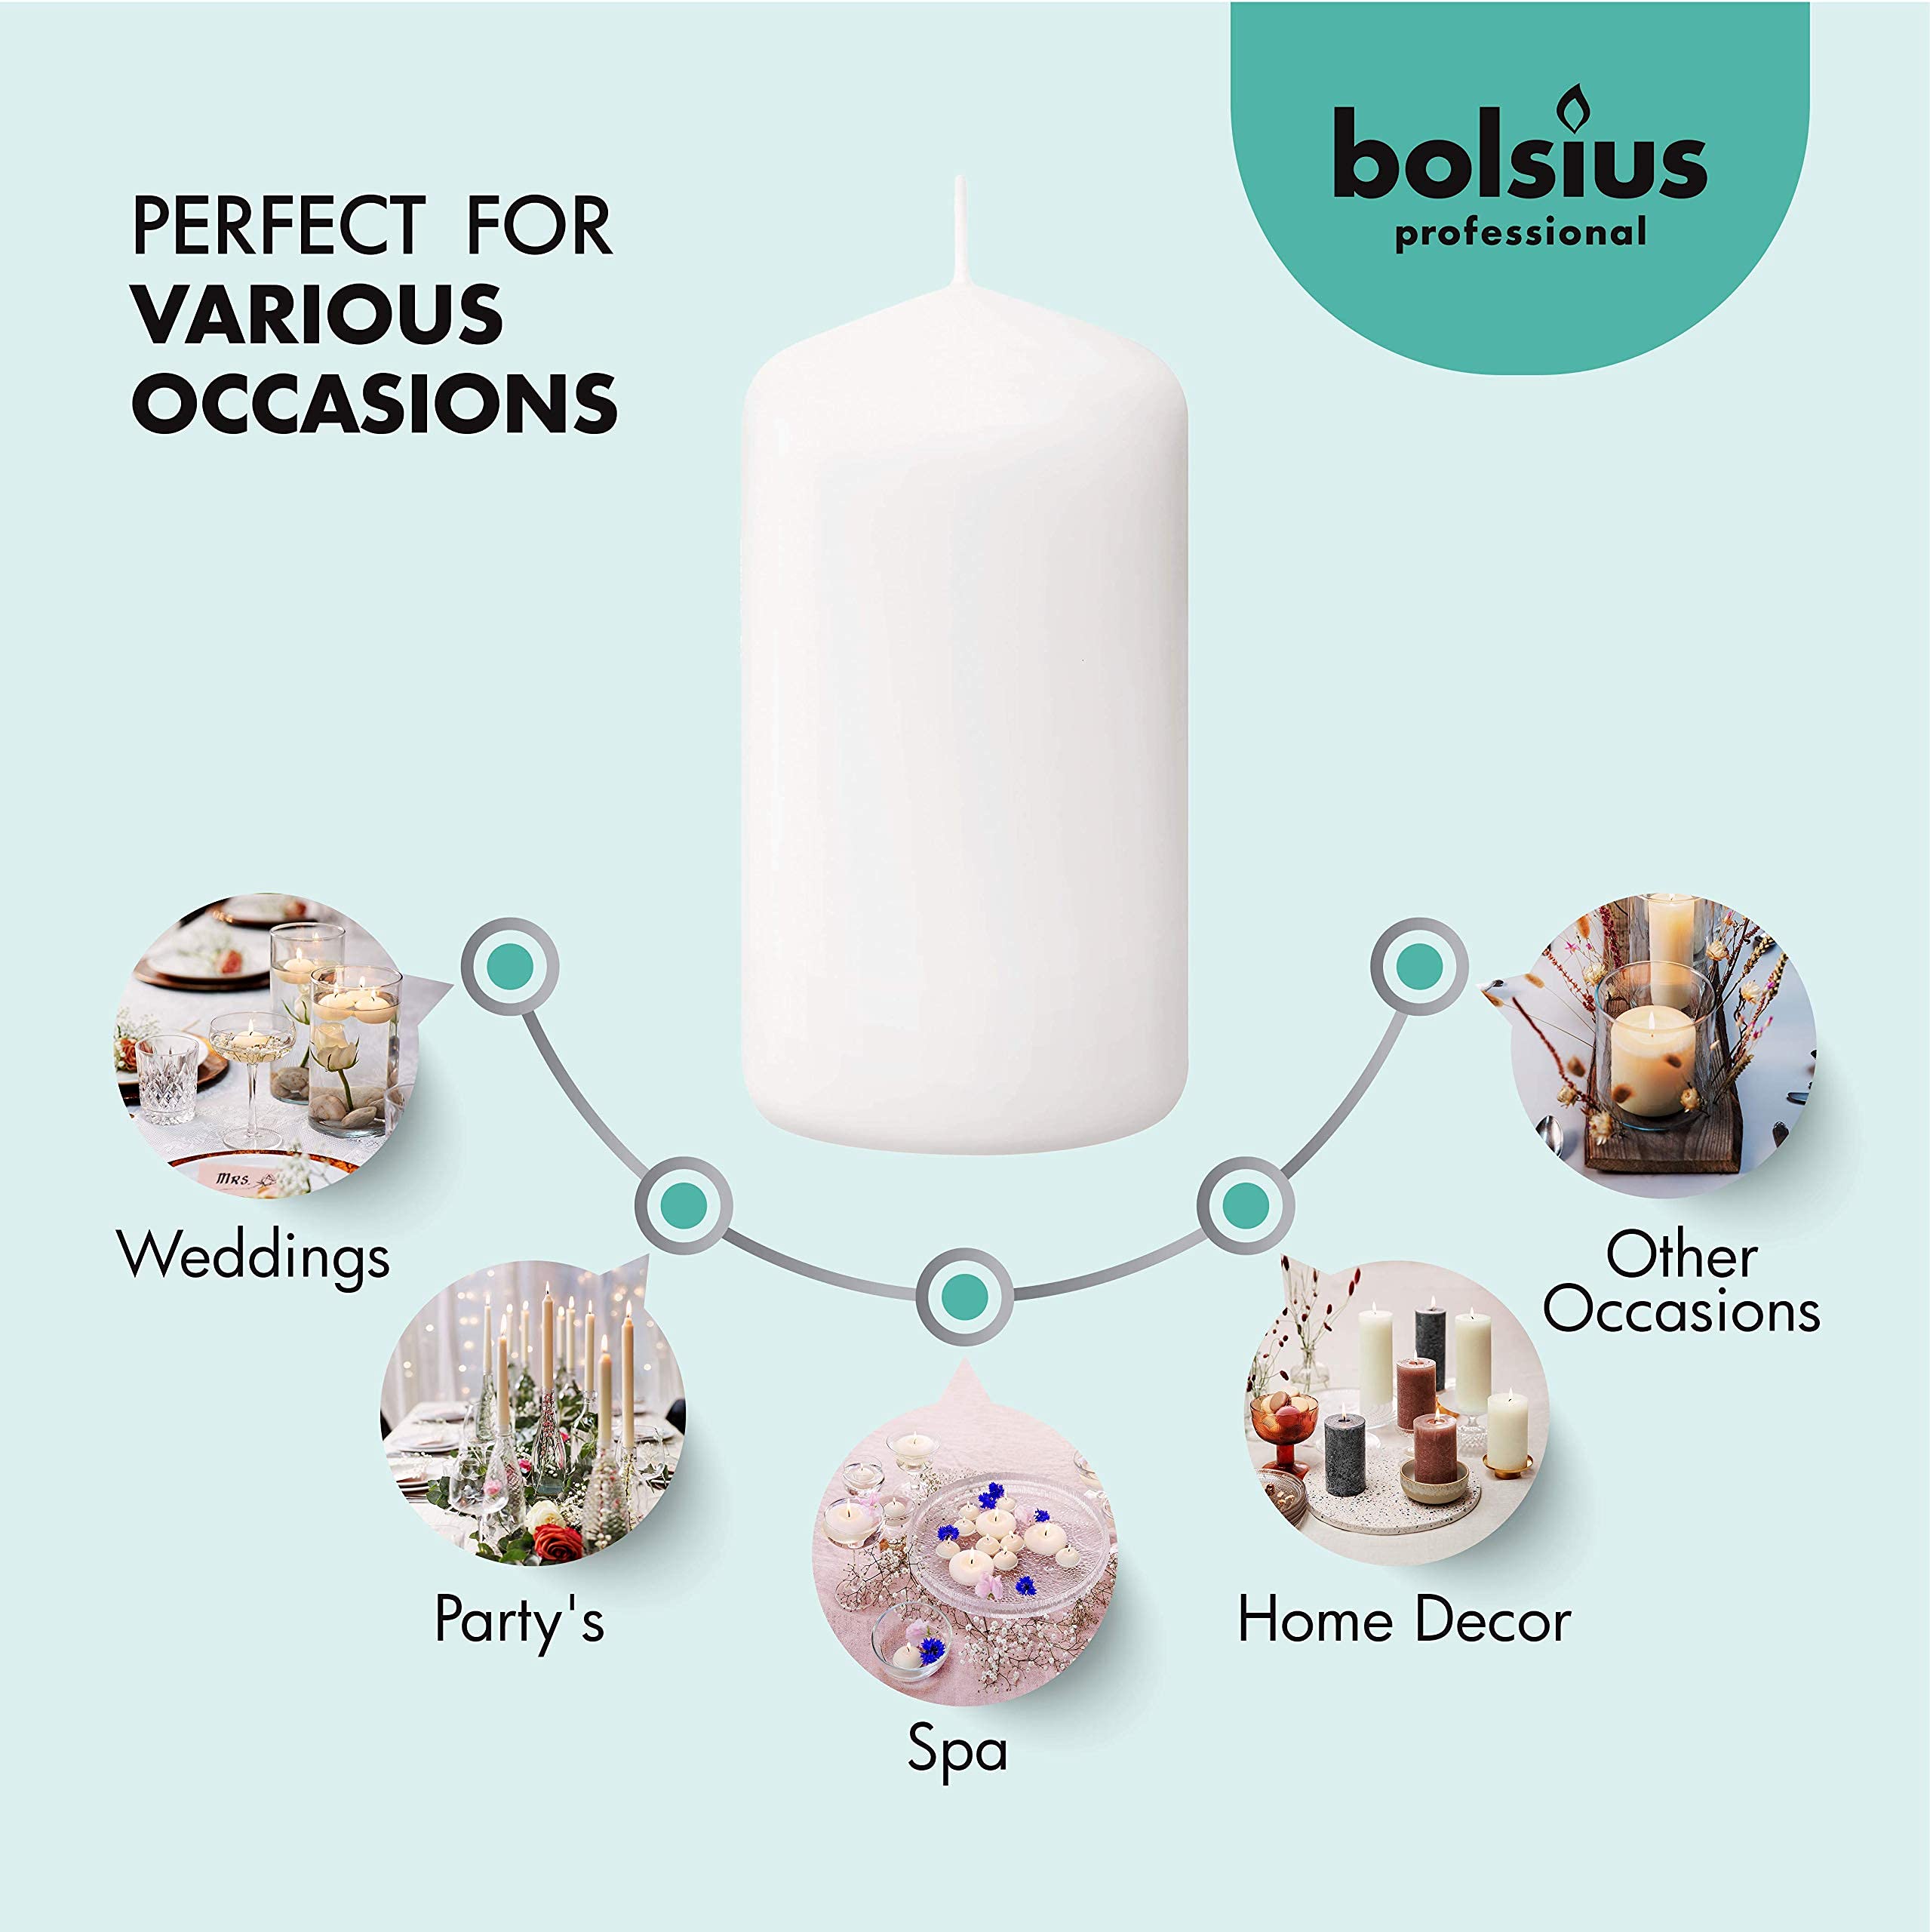 Bolsius White Pillar Candles � 2x3 Inches � 20 Pack Unscented � Premium European Quality � Dripless, Smokeless, and Clean Burning Household Candles � Perfect for Wedding, Party, Dinner, And Home D�cor  - Acceptable